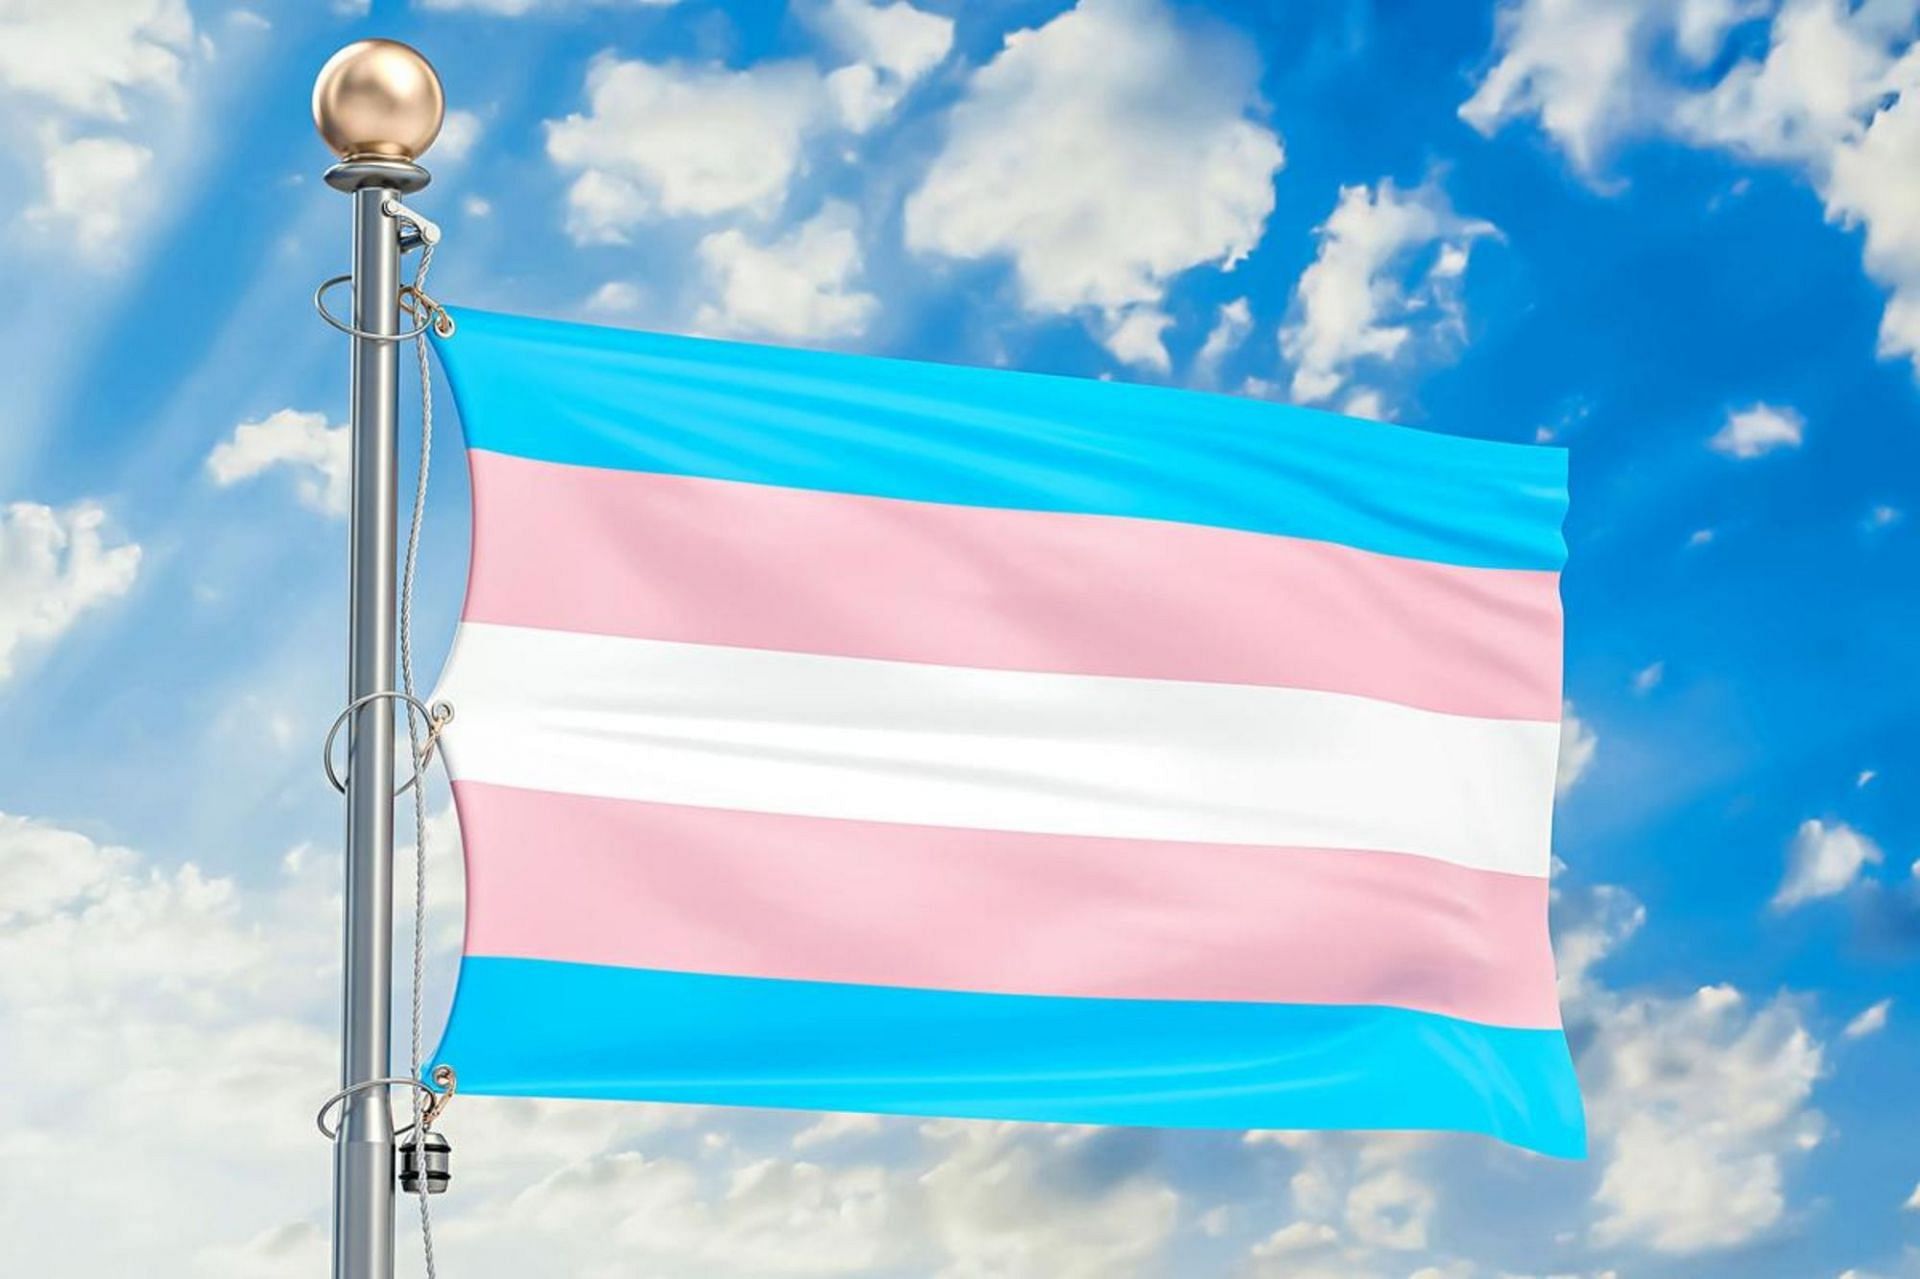 Trans Day of Vengeance sparks concern in light of Nashville school shooting (Image via Getty Images)